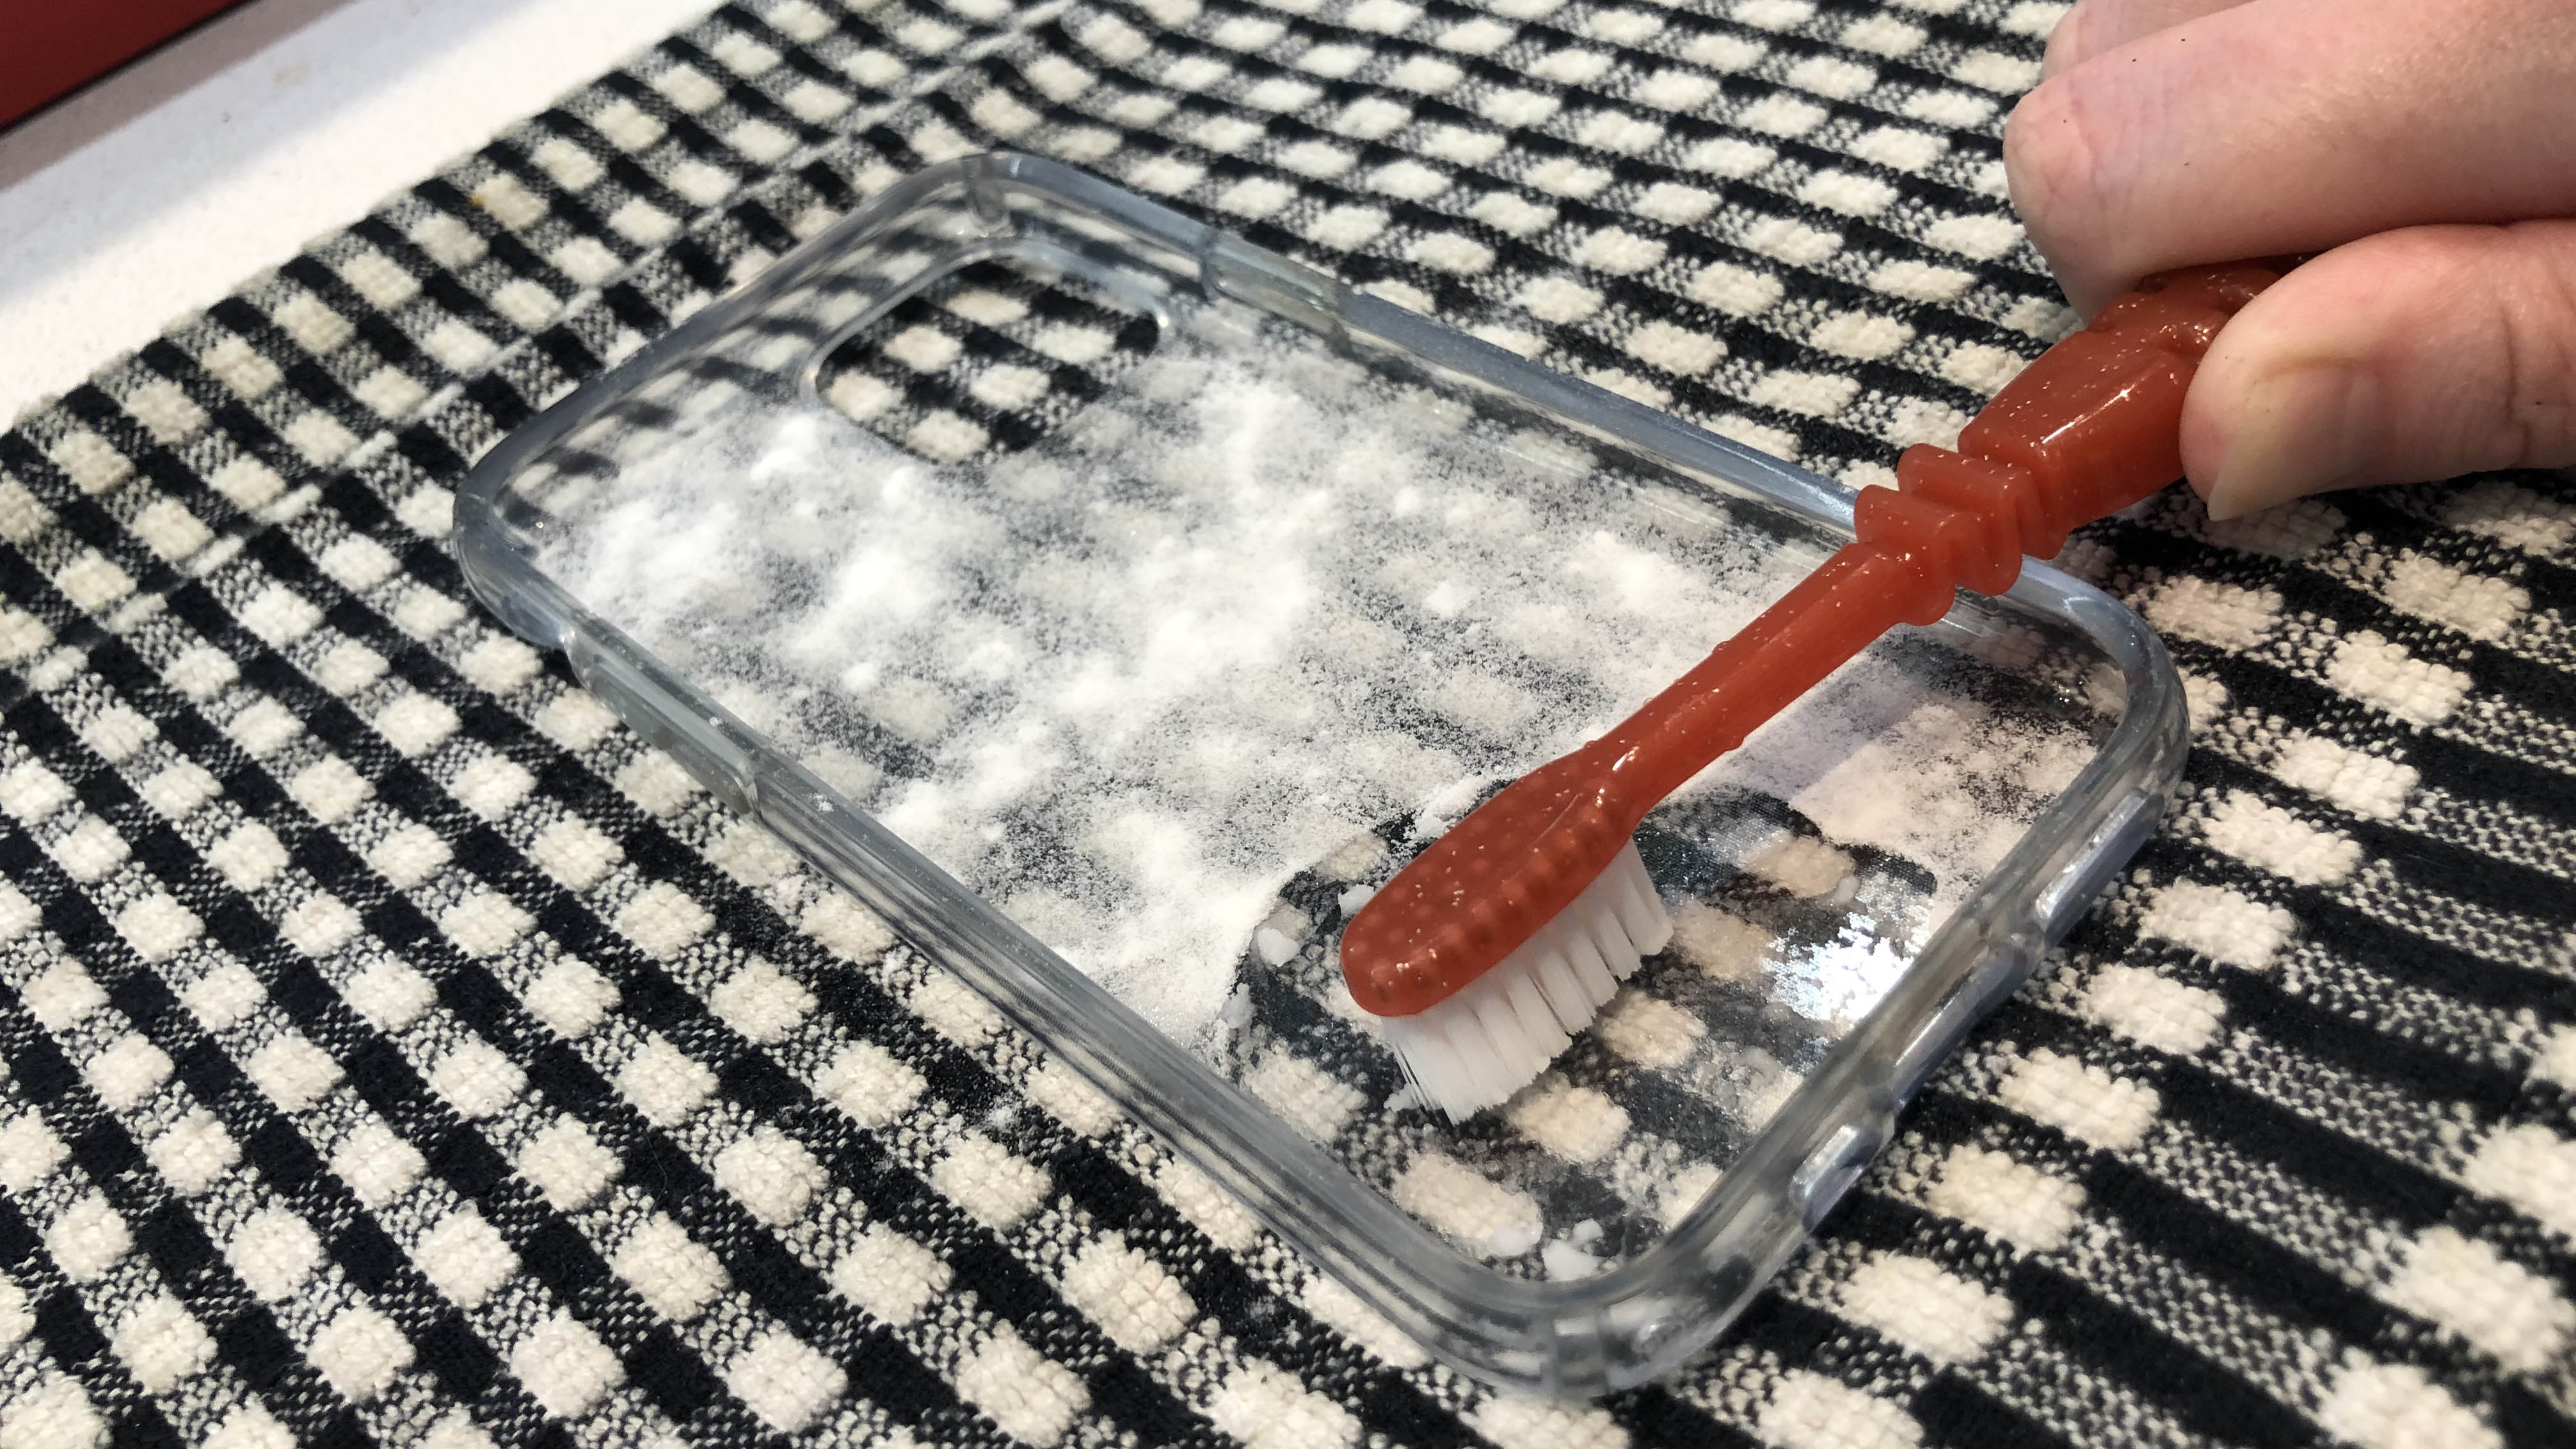 A clear cell phone case placed on a sponge that is cleaned with baking soda and a toothbrush